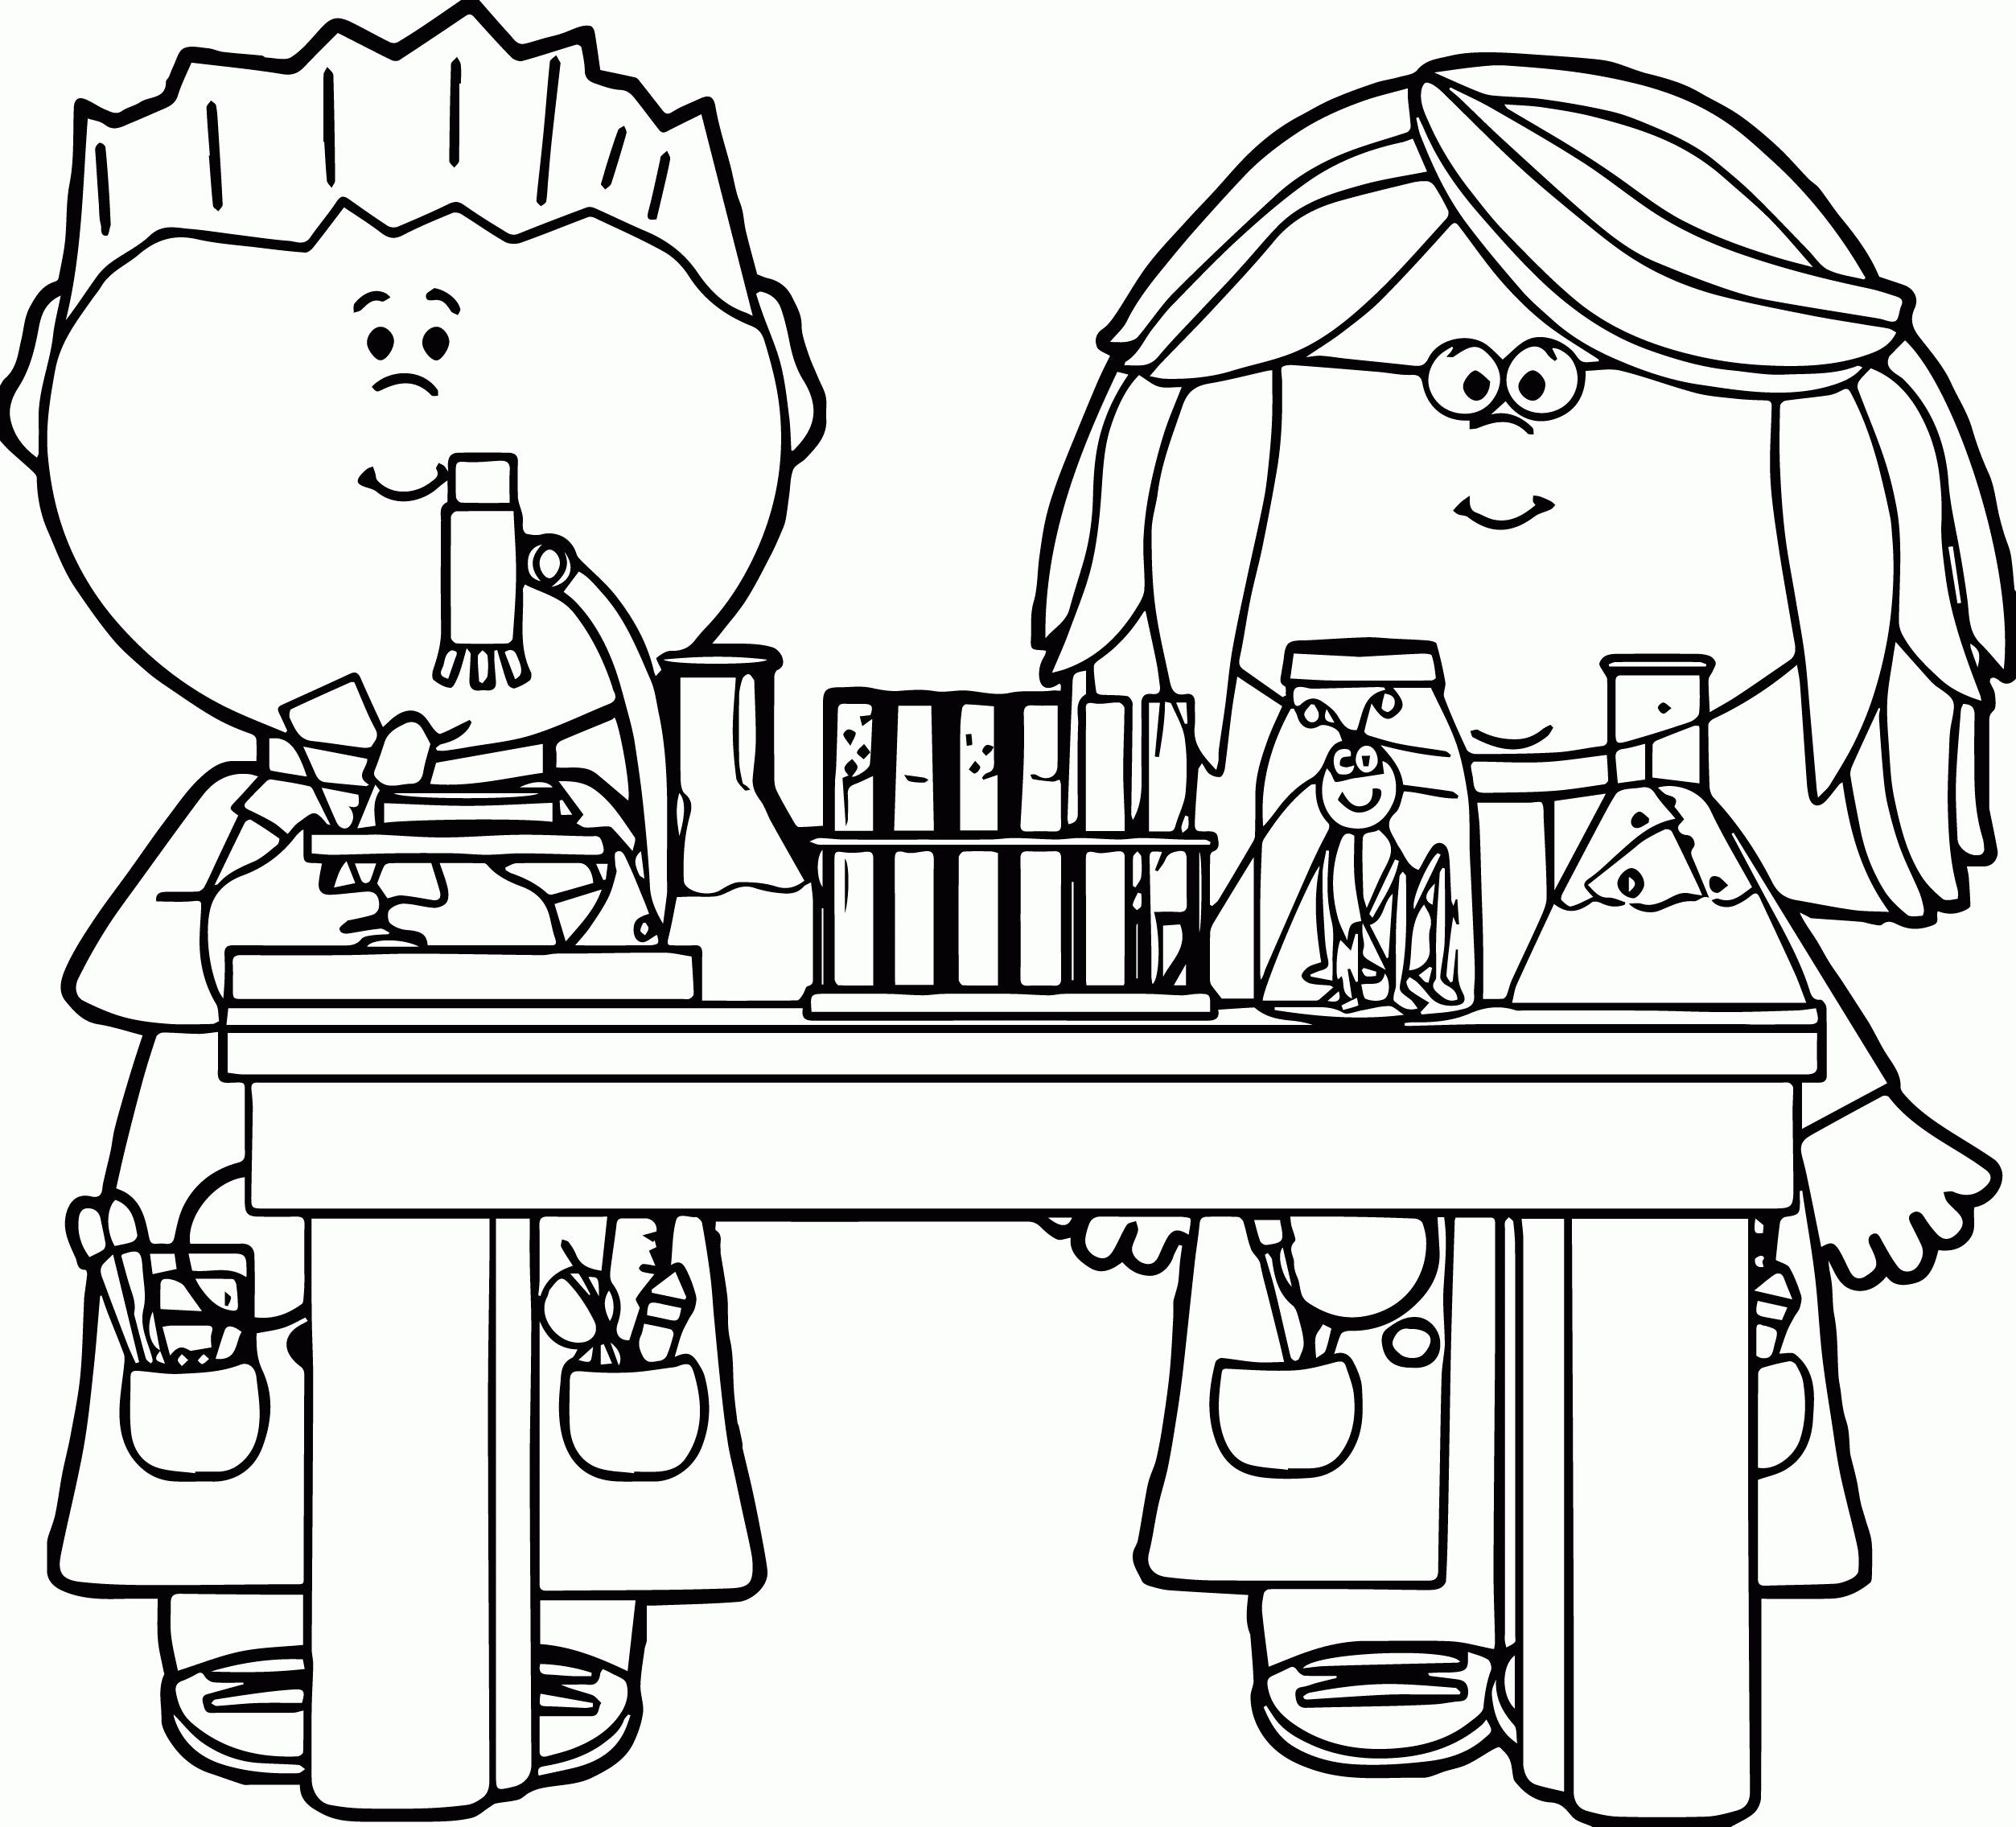 Free Printable Science Lab Coloring Pages, Download Free Printable